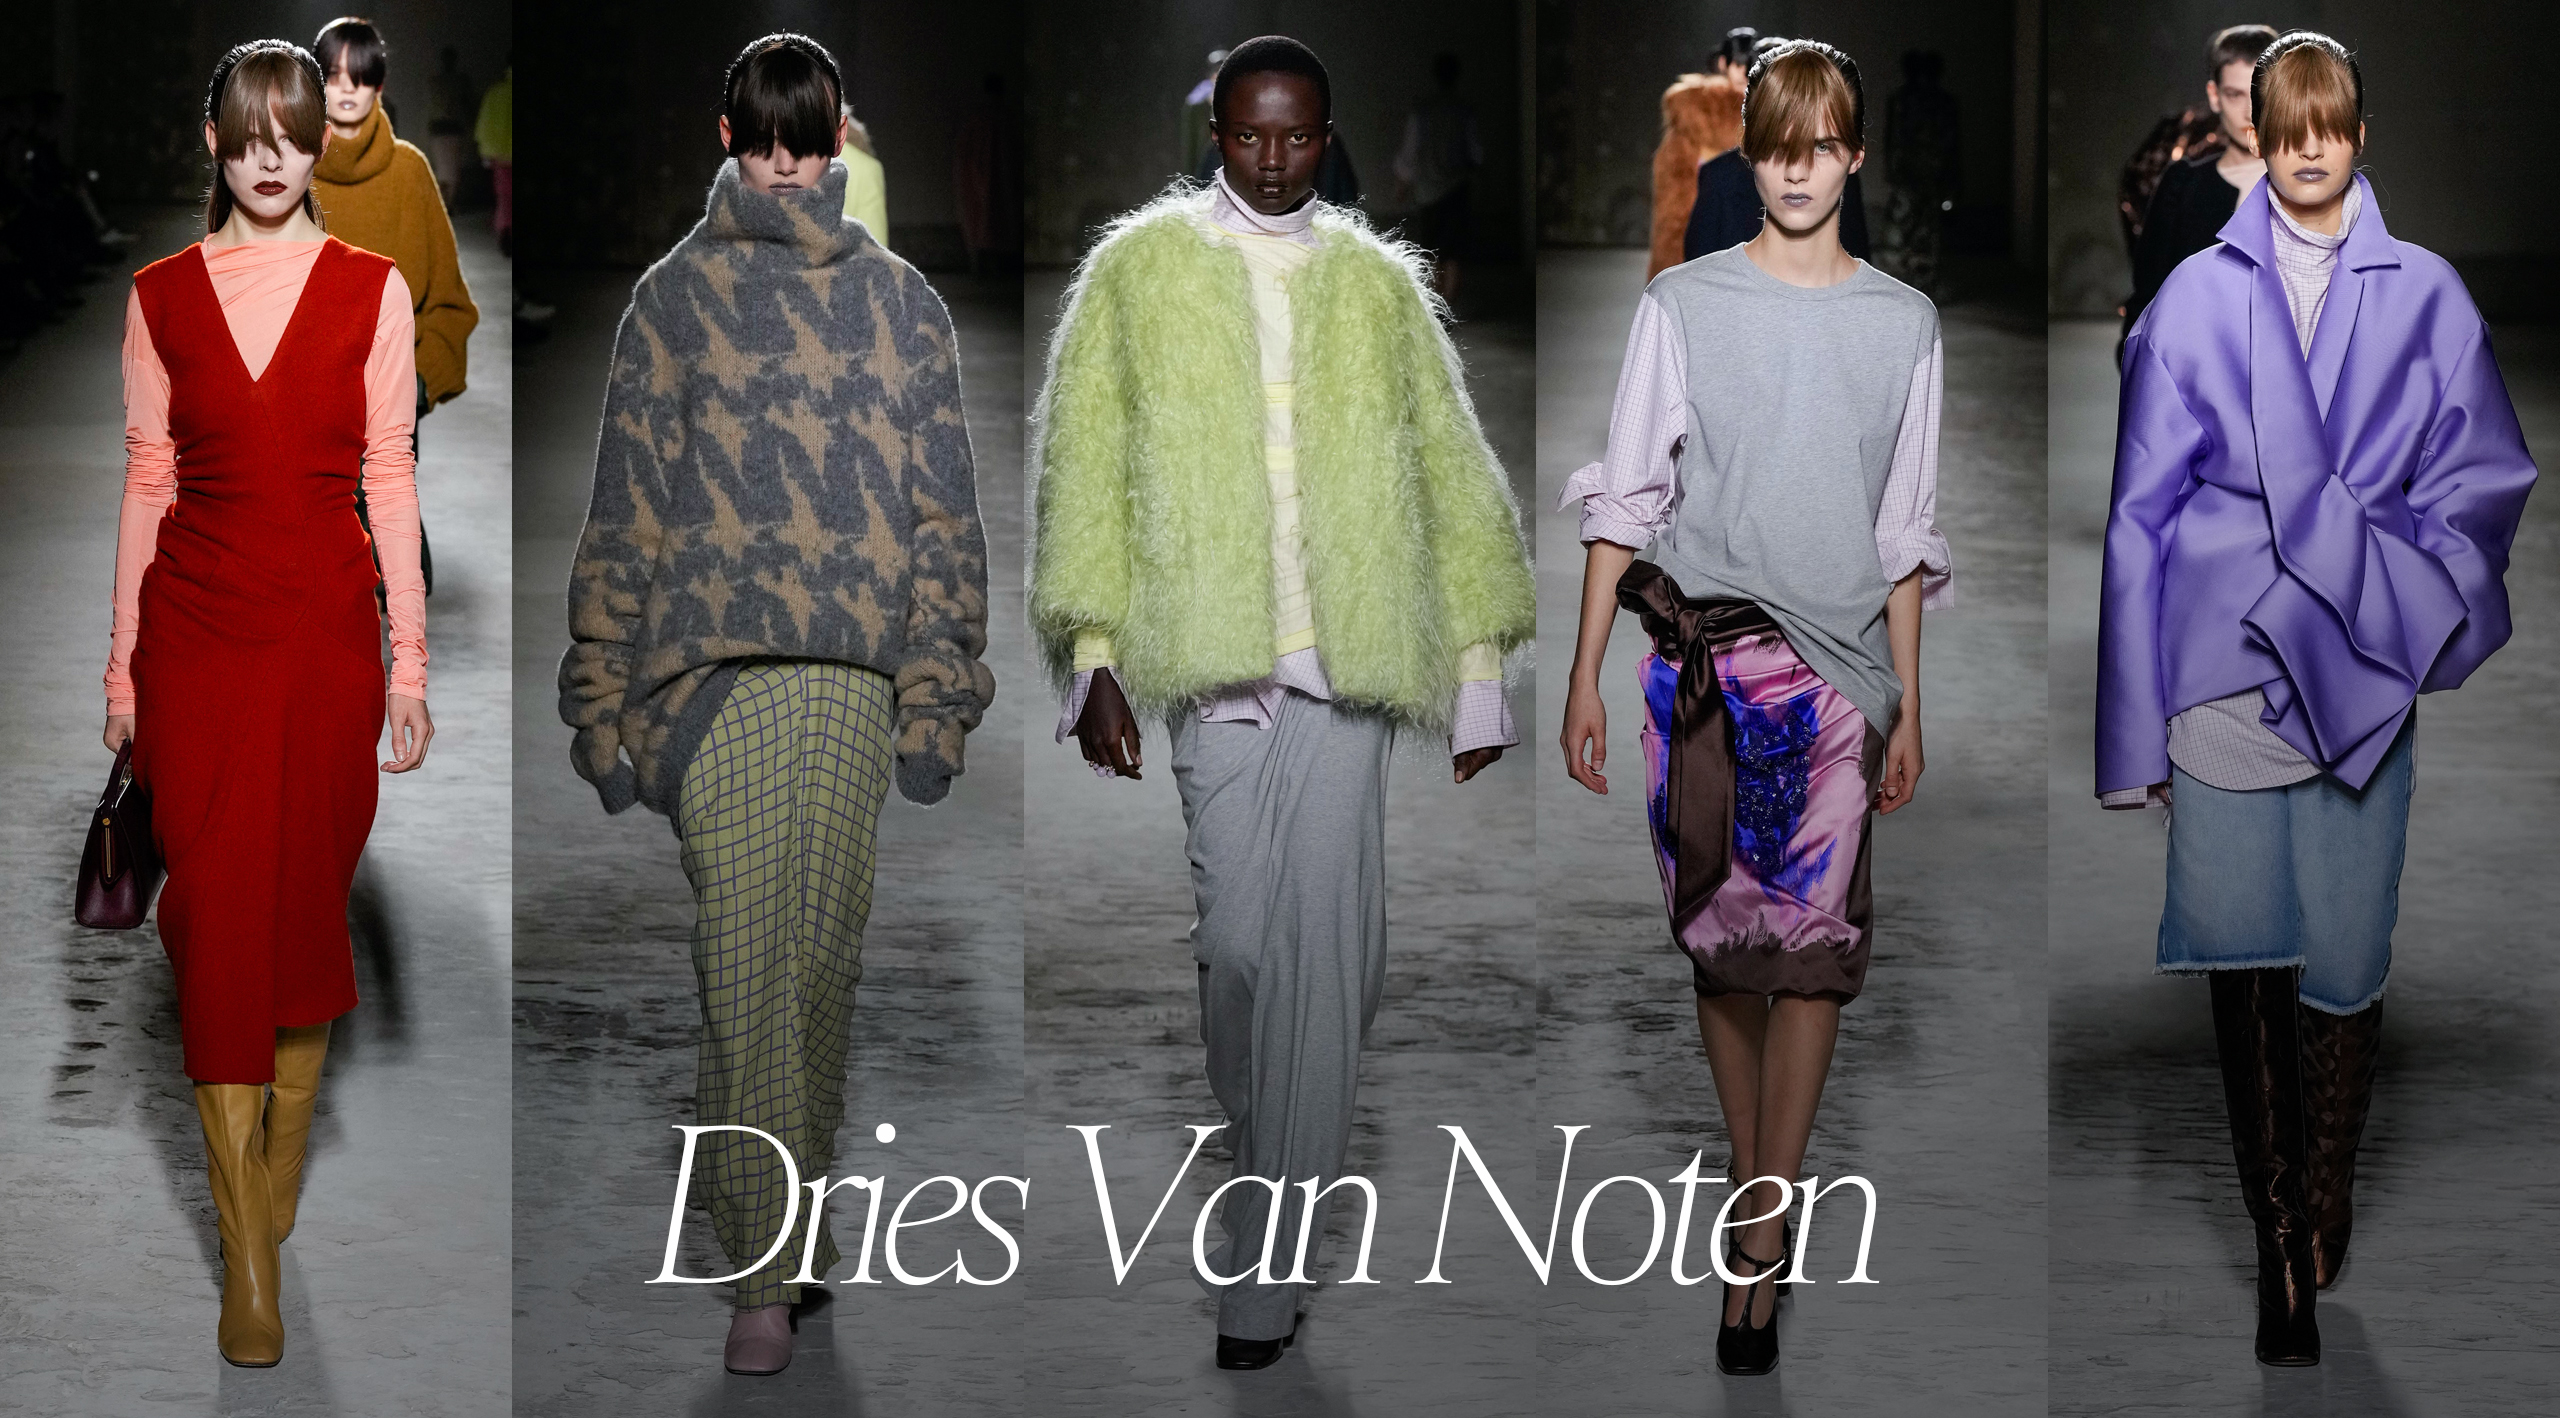 Dries van Noten Fall 2024 fashion show grid for the Top 10 Paris Fall 2024 fashion shows for the Impression